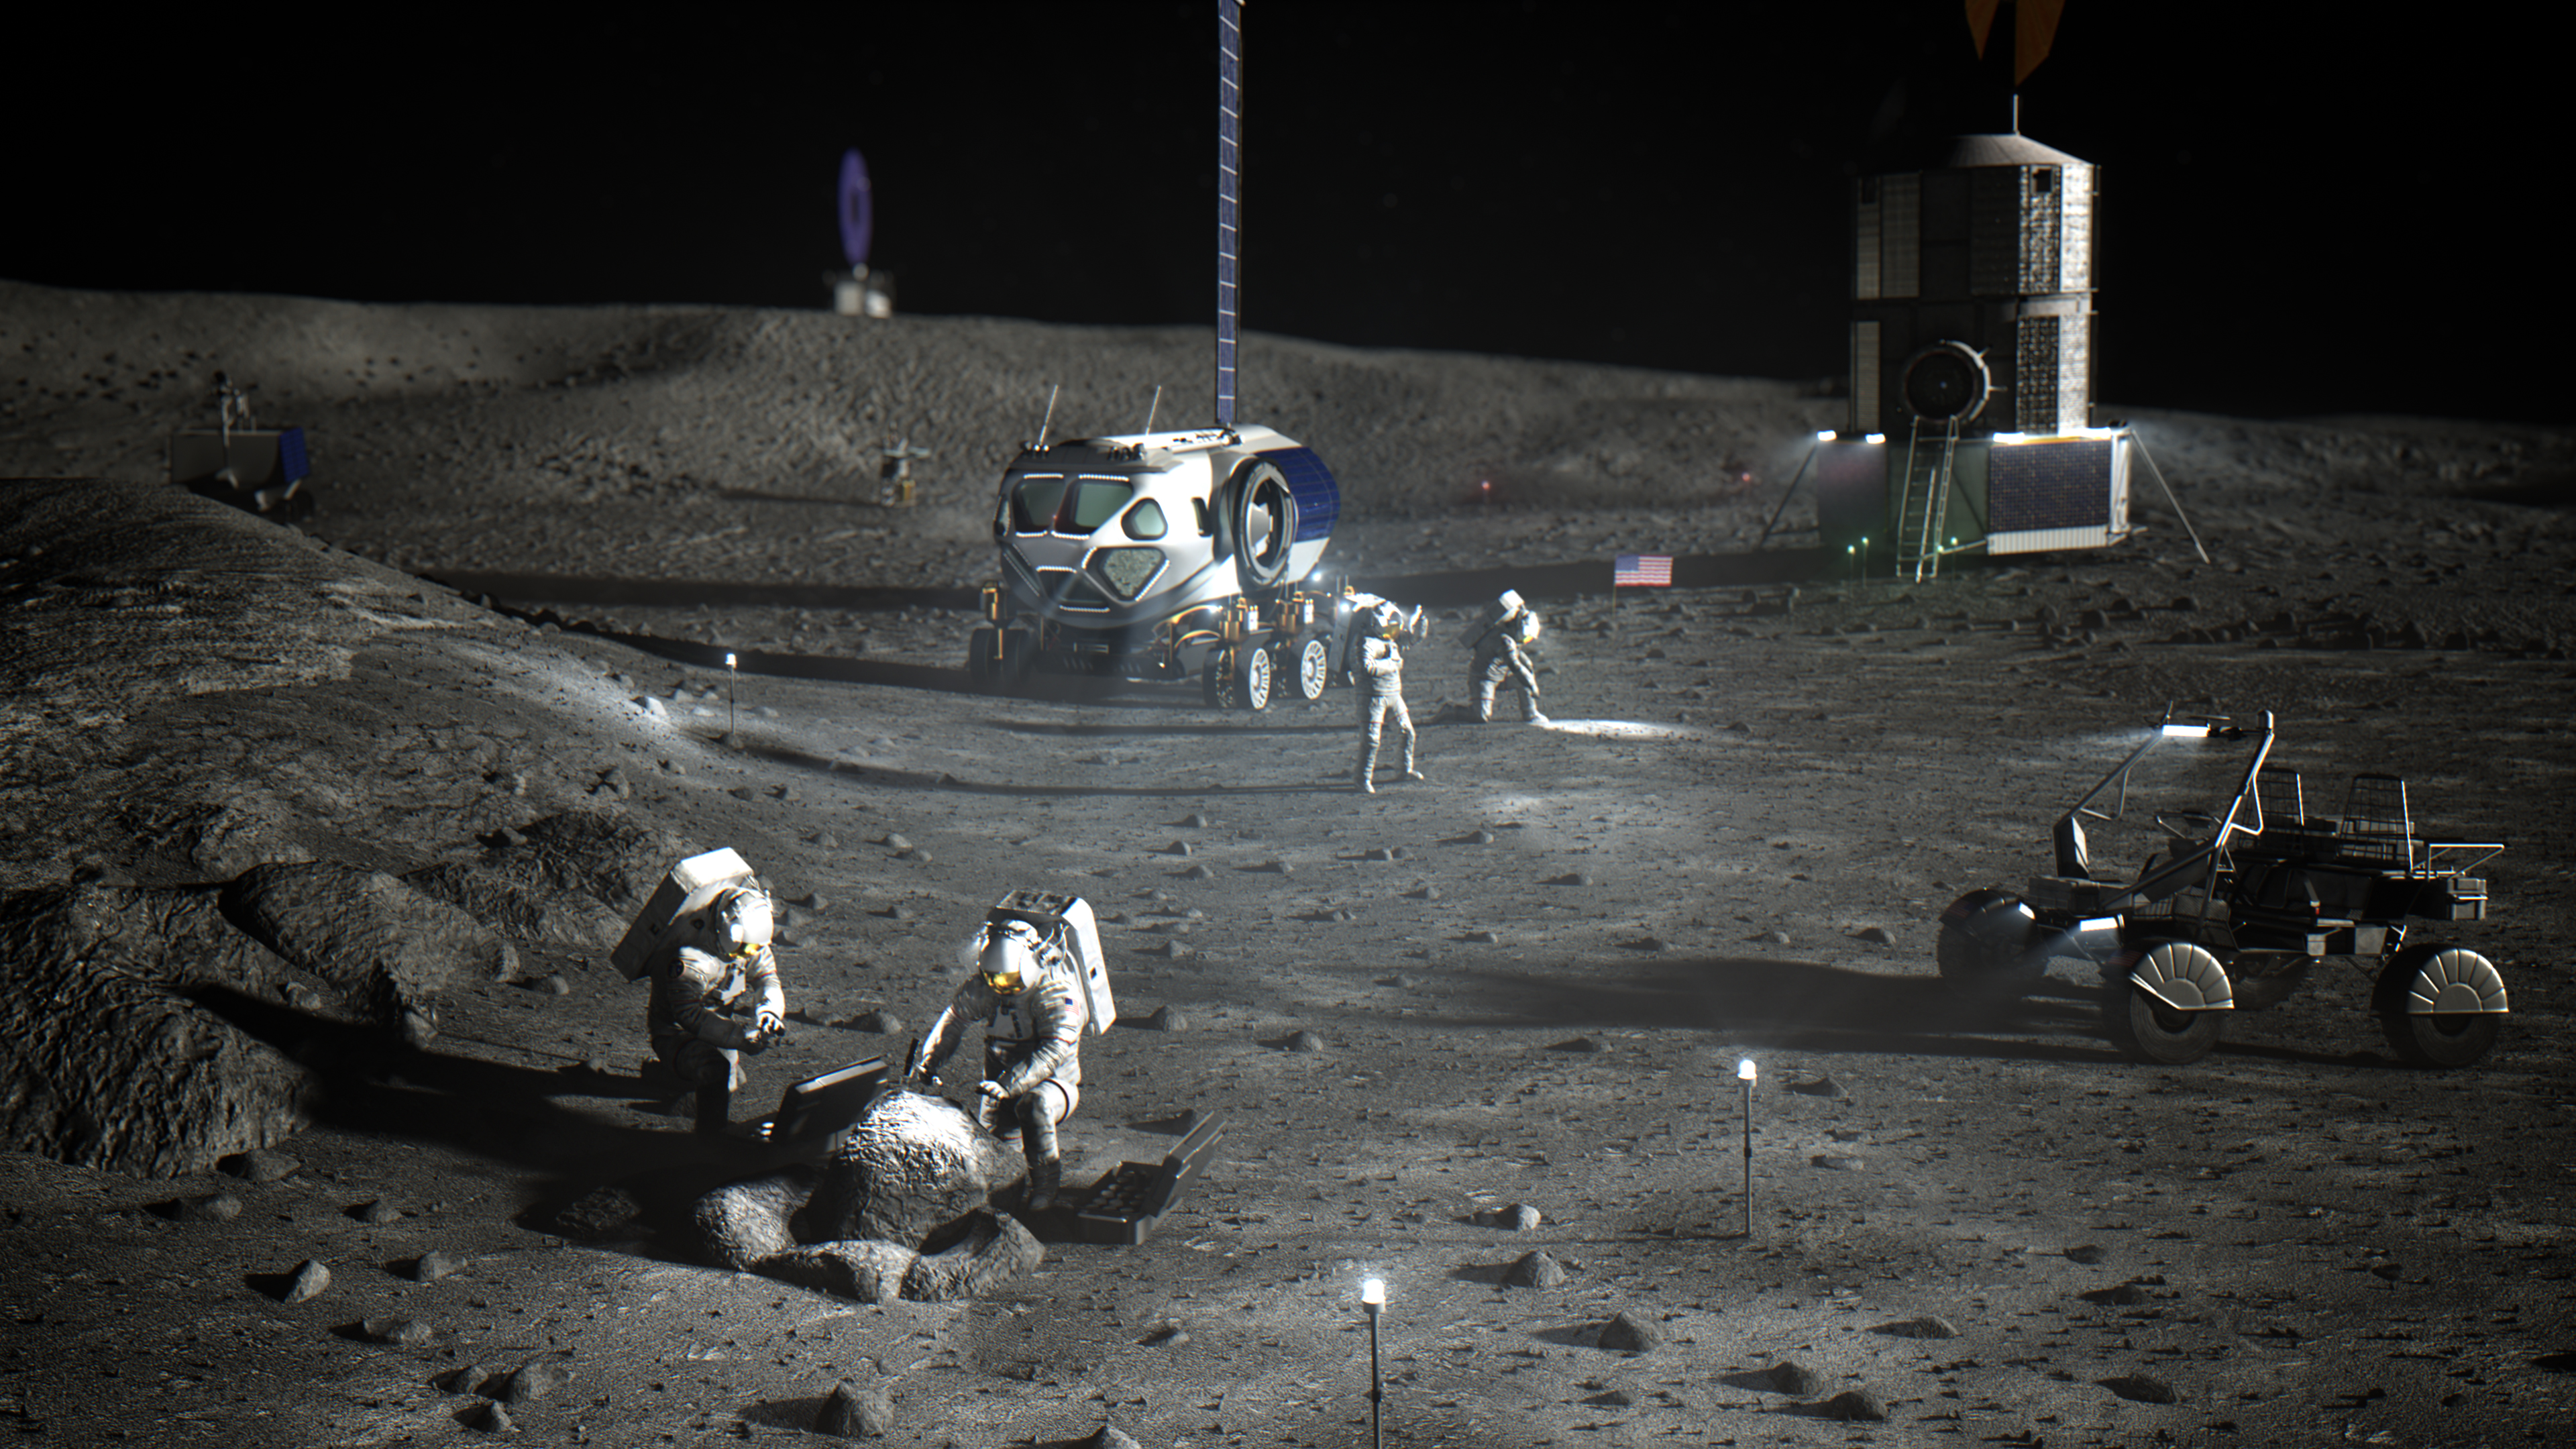 A mock-up of what a moon base camp might look like on the moon, including astronauts in spacesuits and a wheeled rover.